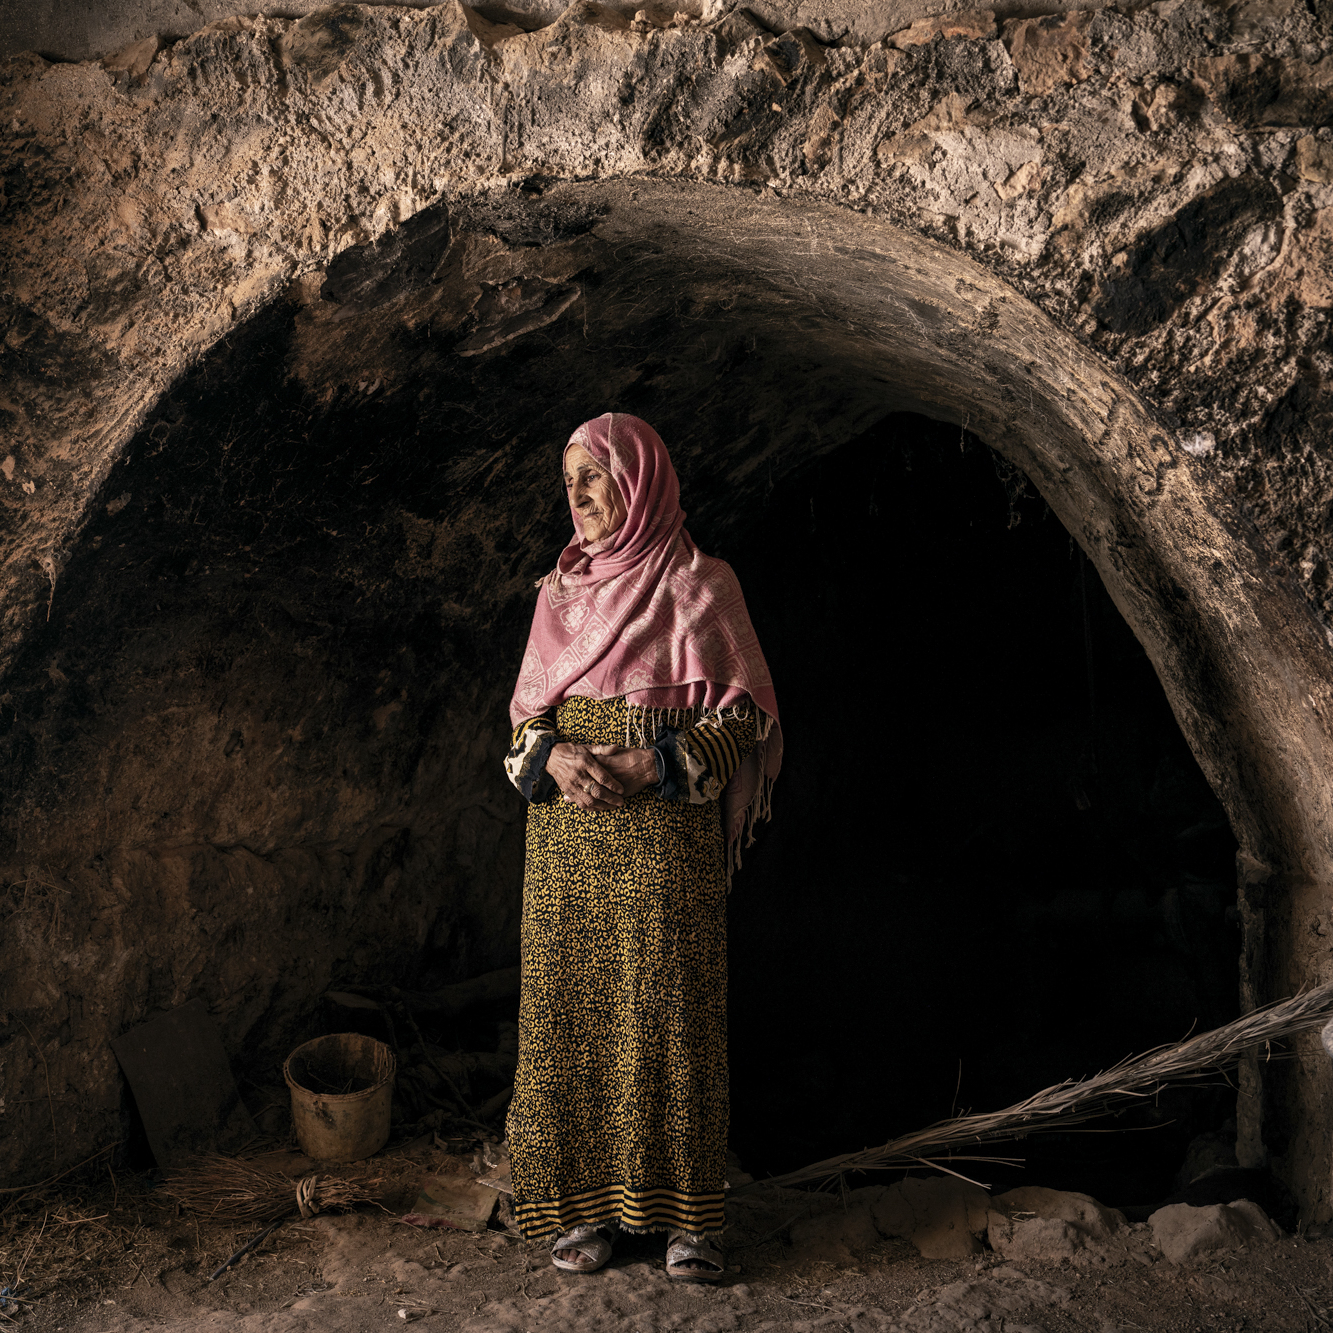 Fatma Hamdi, 73, jabs a giant iron key impatiently into the lock in a heavy palm wood door, pushing it open to allow sunlight to stream in. Inside, there is a centuries-old olive press in a cave next to the family home. Several generations ago when the wheel last turned, a horse would pull the stone round in the dark to squeeze the oil from olives that had dried in the sun for several weeks to be sold at market. Matmata, Tunisia 2023.